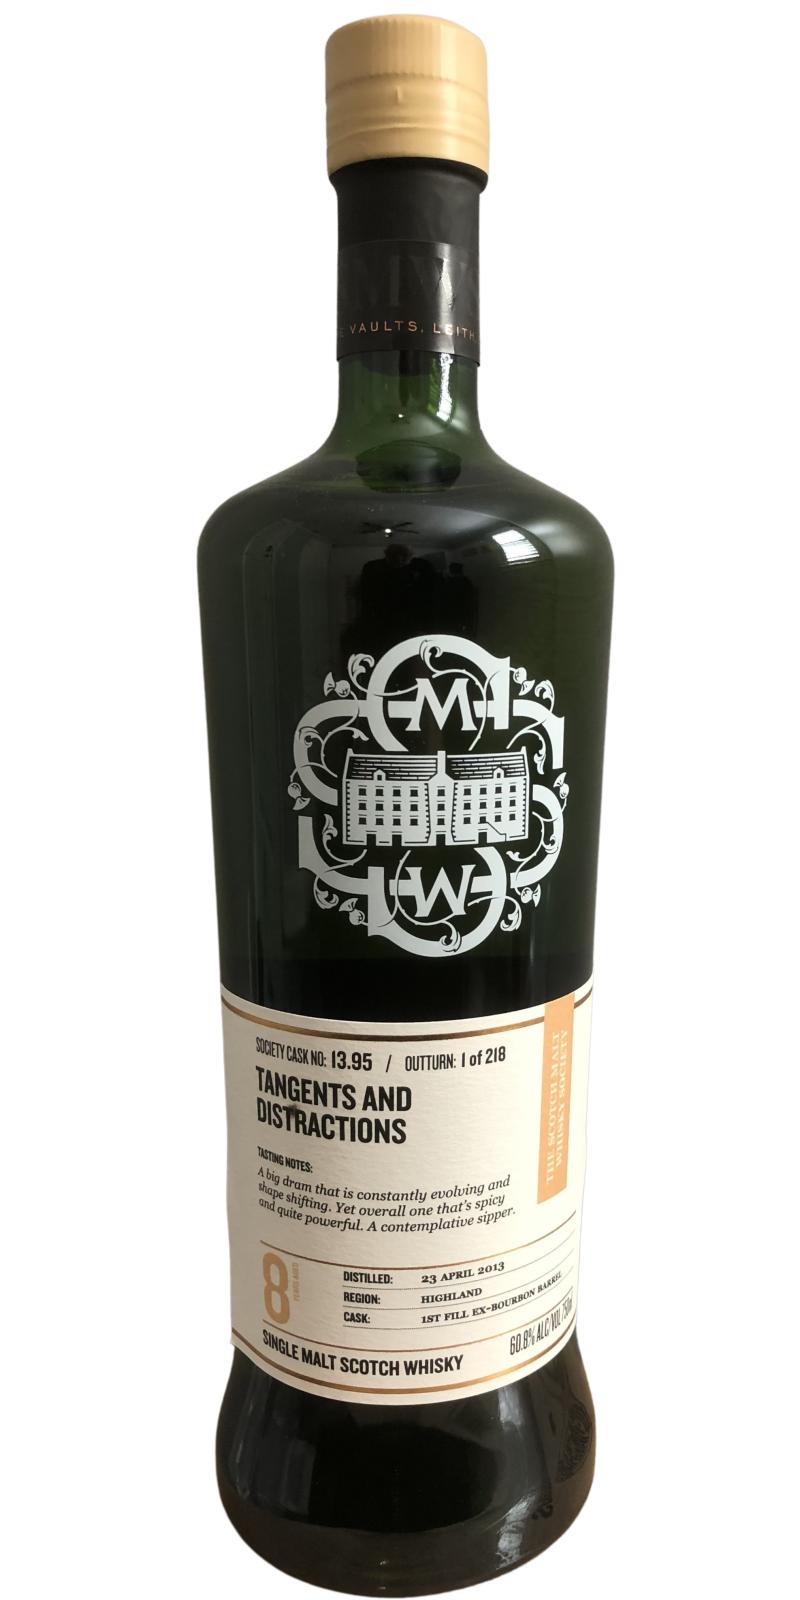 Dalmore 2013 SMWS 13.95 Tangents and distractions 1st Fill Ex-Bourbon Barrel The Scotch Malt Whisky Society 60.8% 750ml